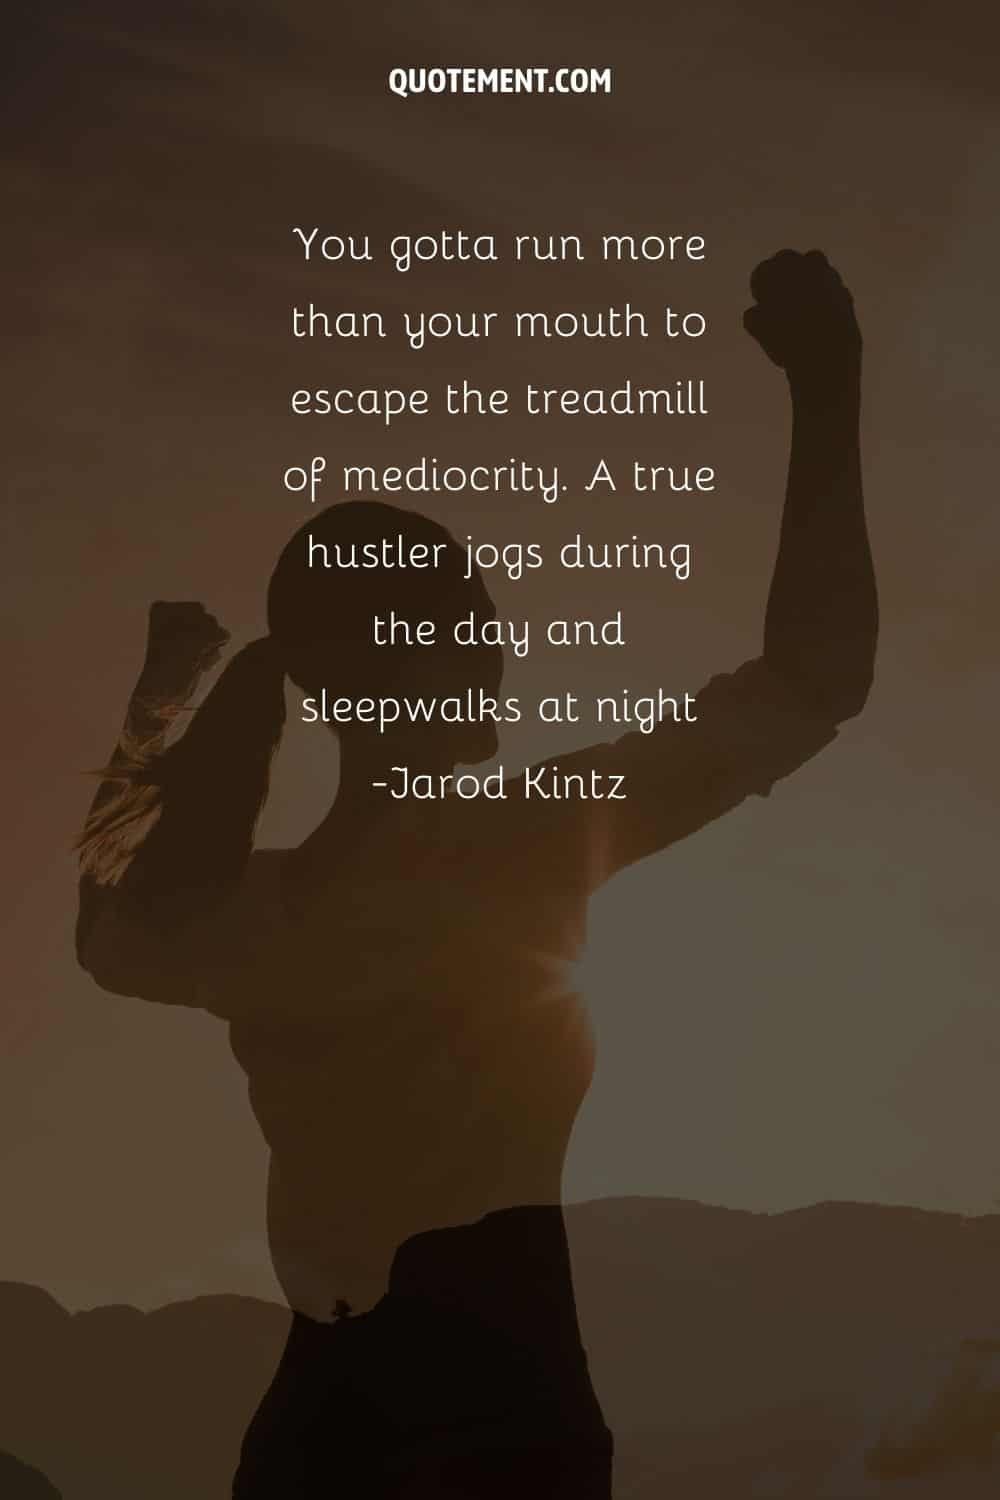 You gotta run more than your mouth to escape the treadmill of mediocrity